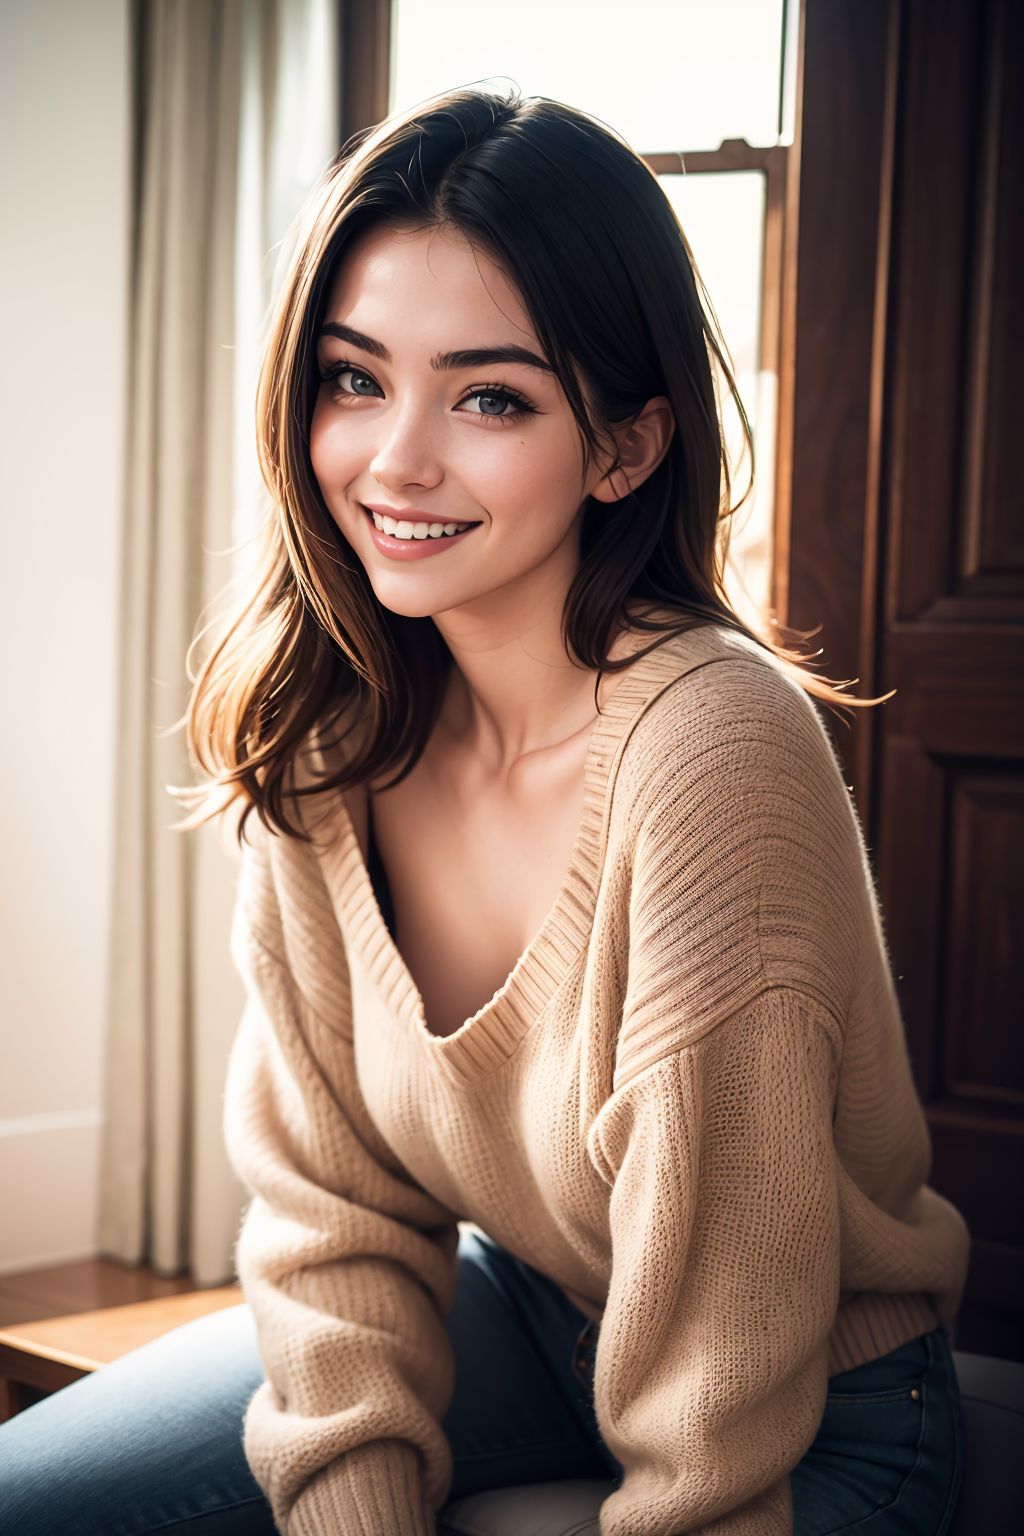 hyperrealistic photo of an edgy pinterest woman, 20 years old, wearing an oversized sweater, happy, dimples, natural look,...